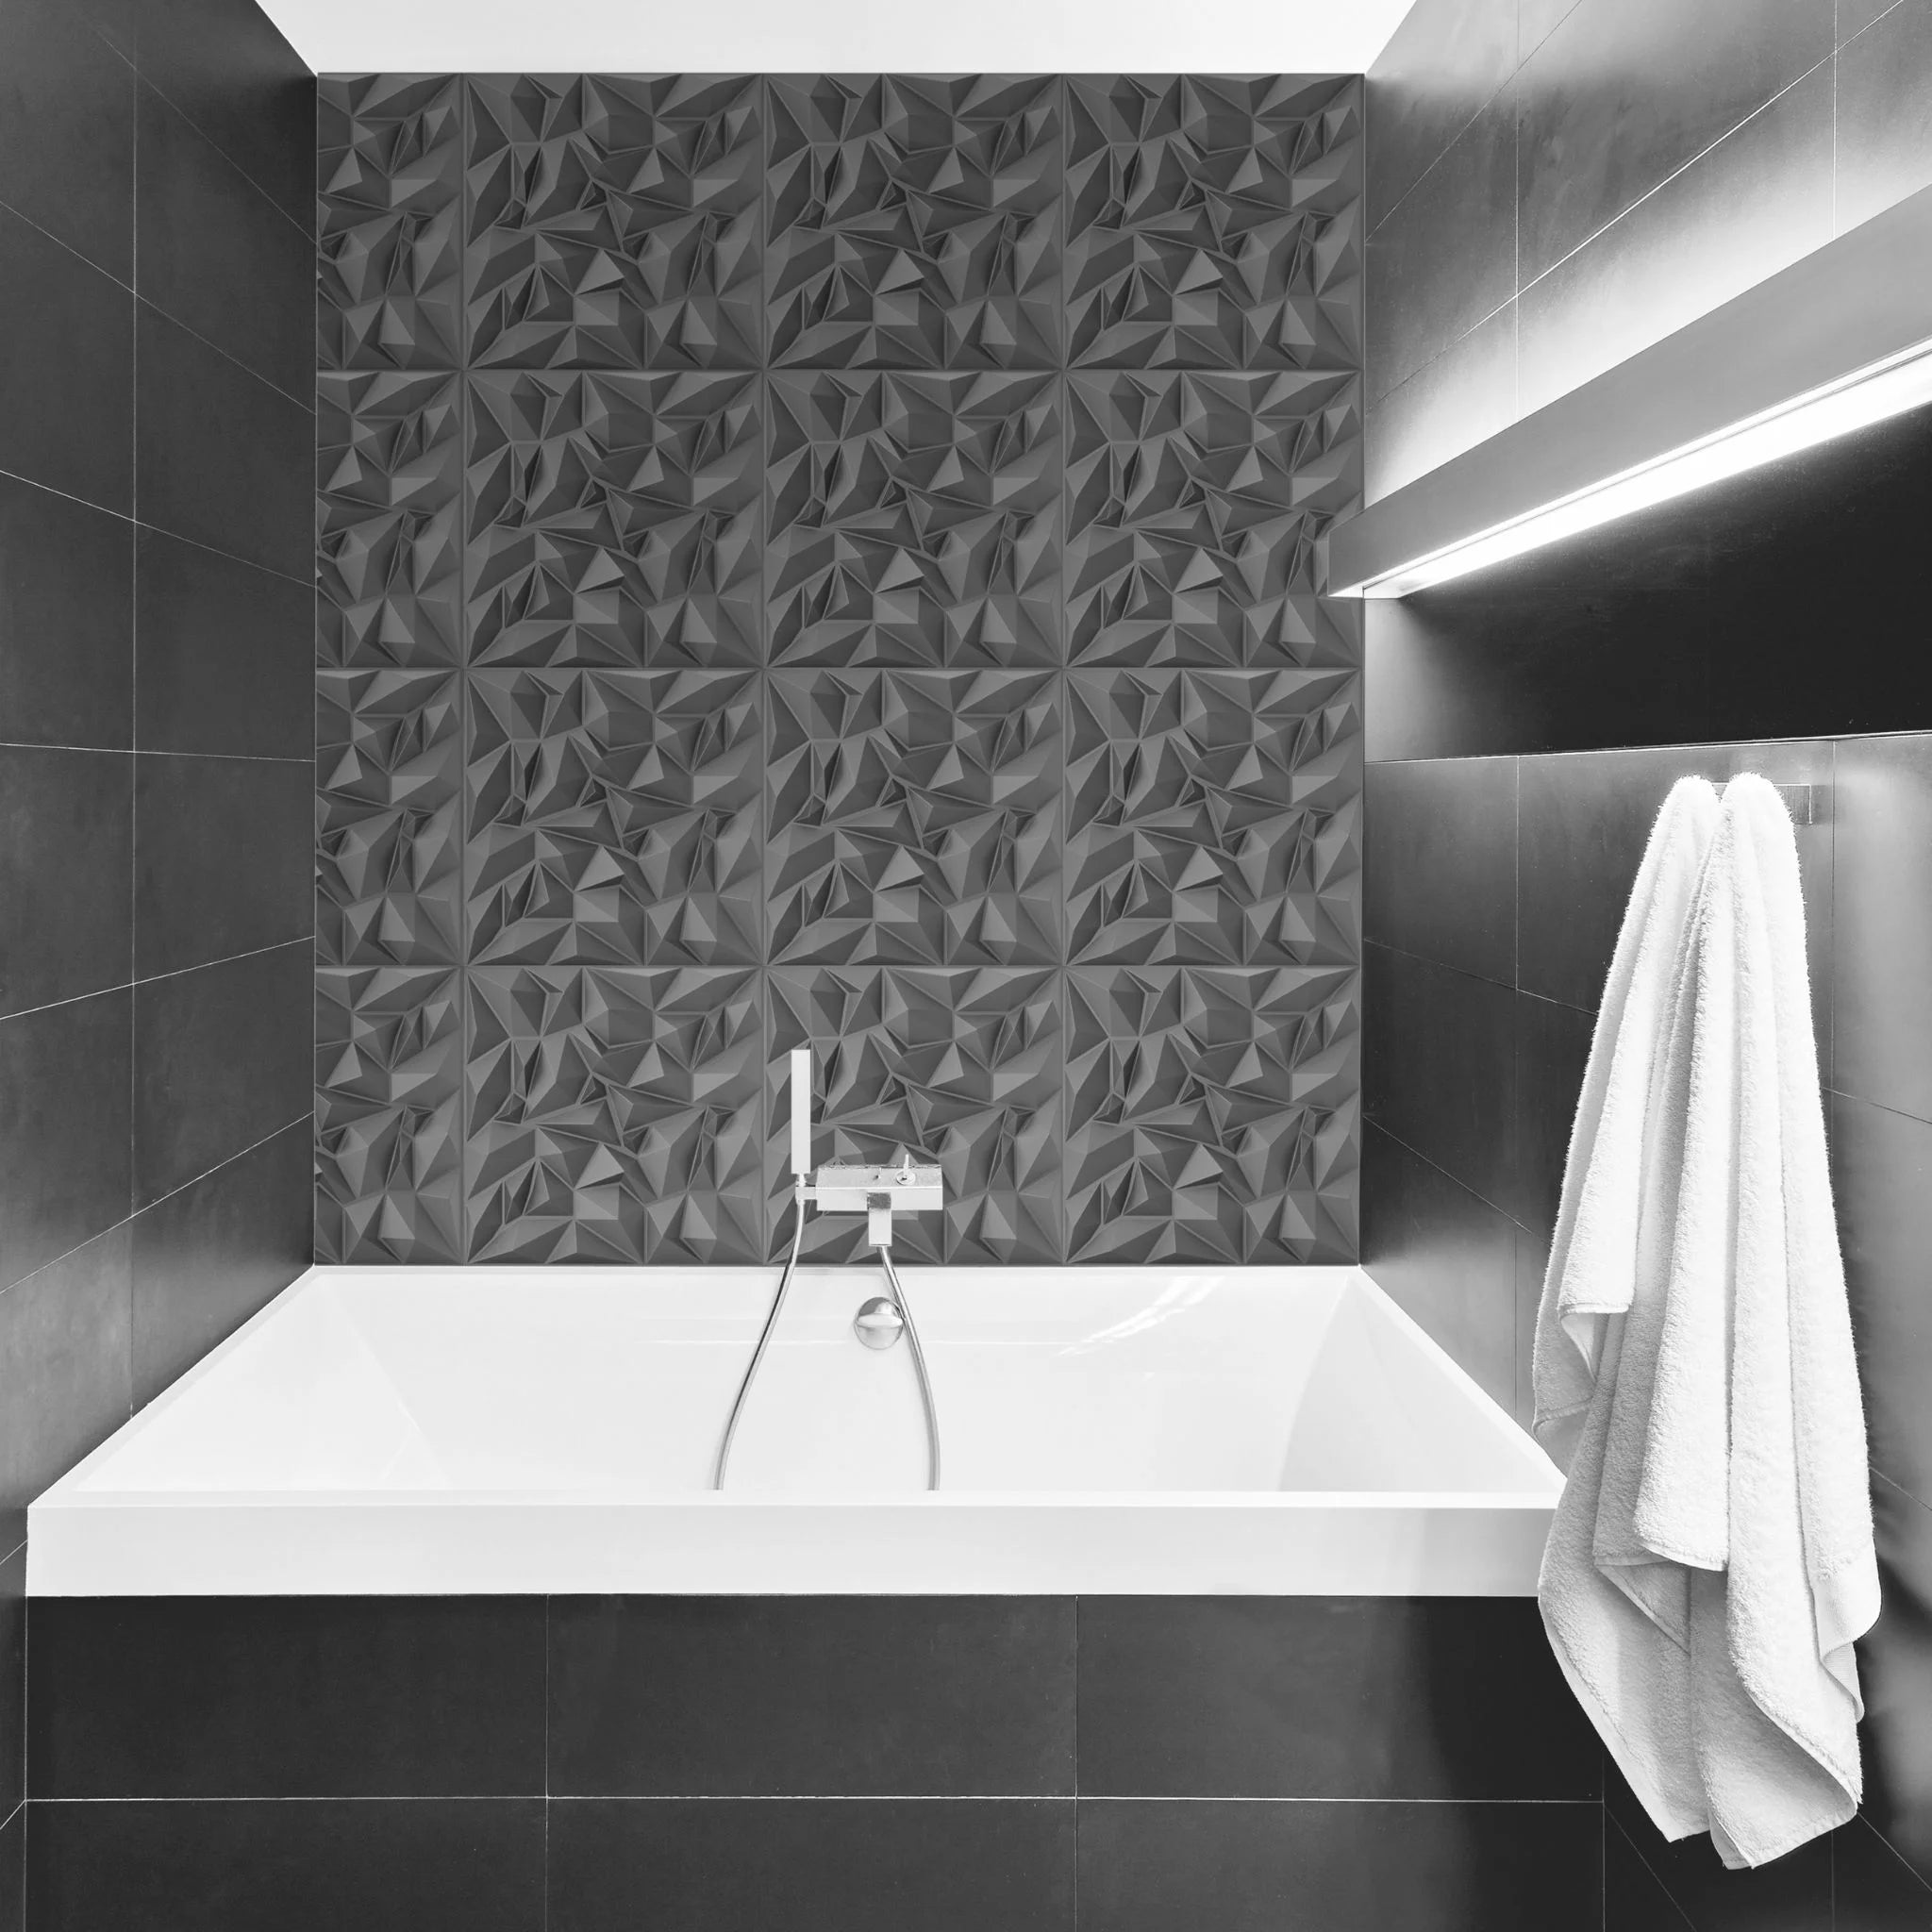 Bathroom with silver geometric-patterned PVC wall panels and modern furniture